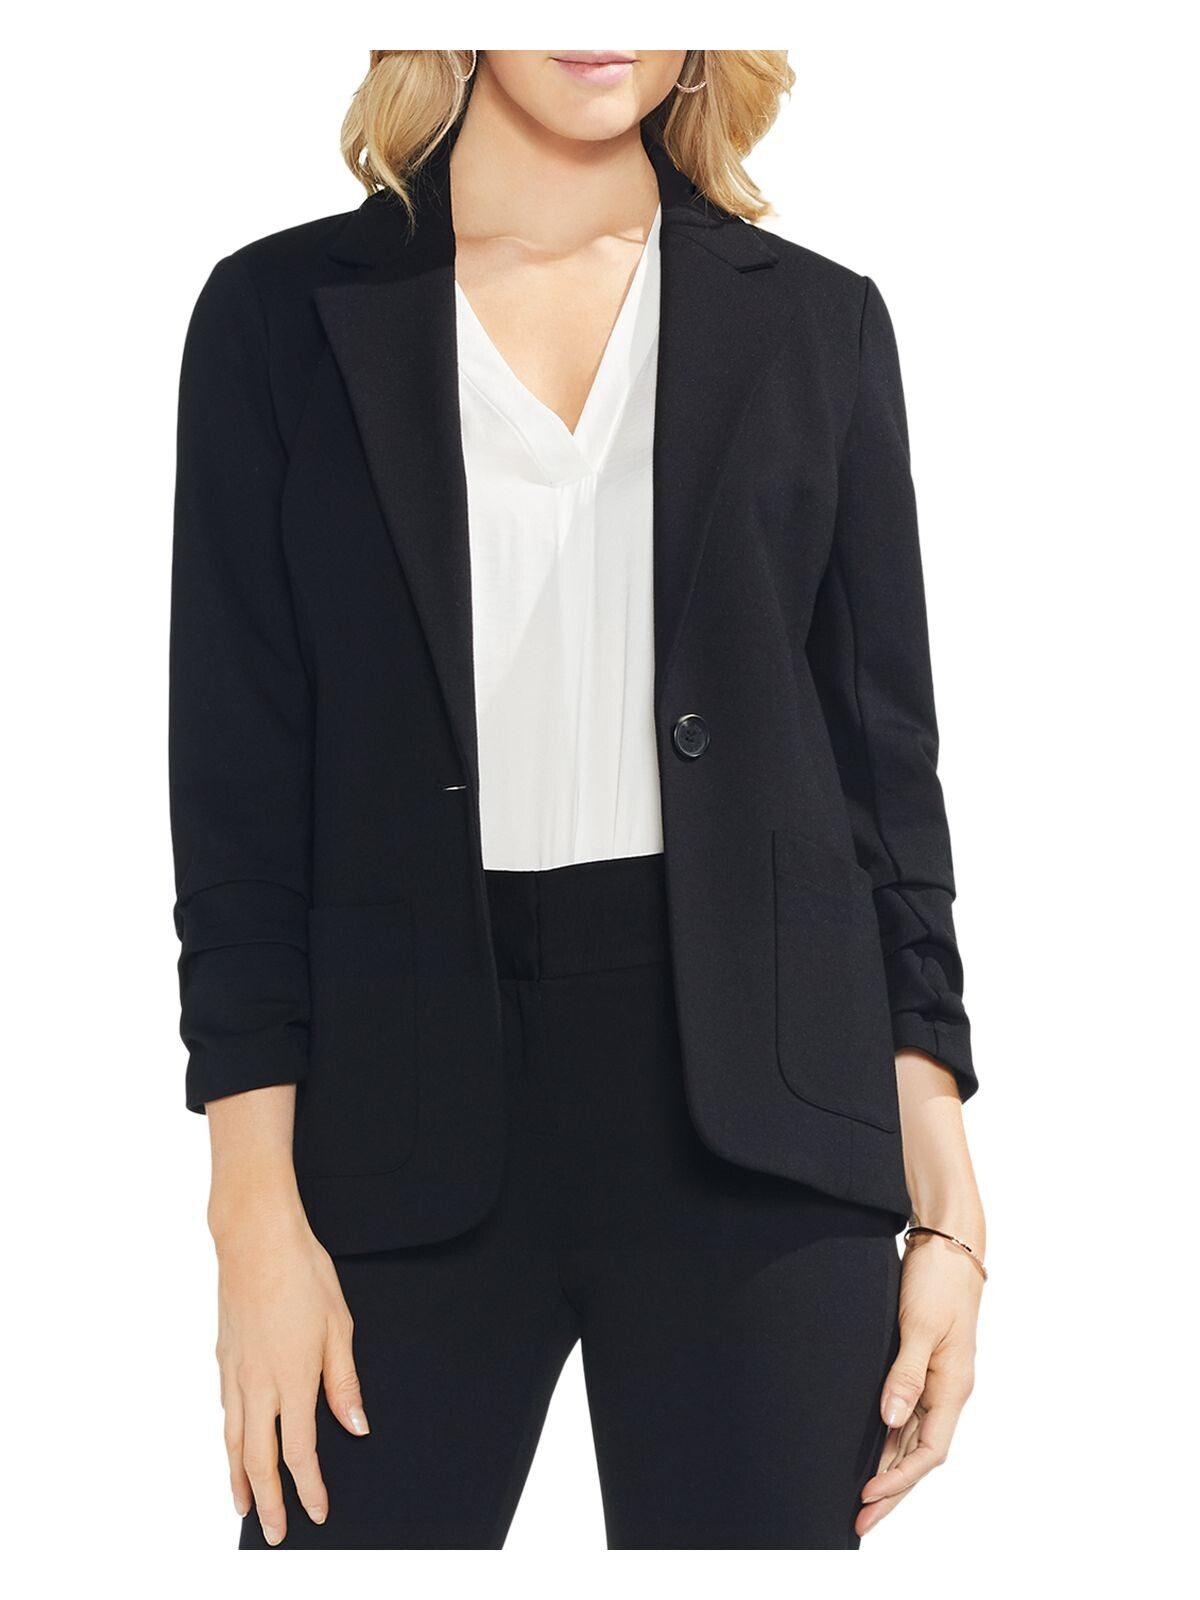 VINCE CAMUTO Womens Black Pocketed Ruched 3/4 Sleeve Notched Collar Button Wear To Work Blazer Jacket L